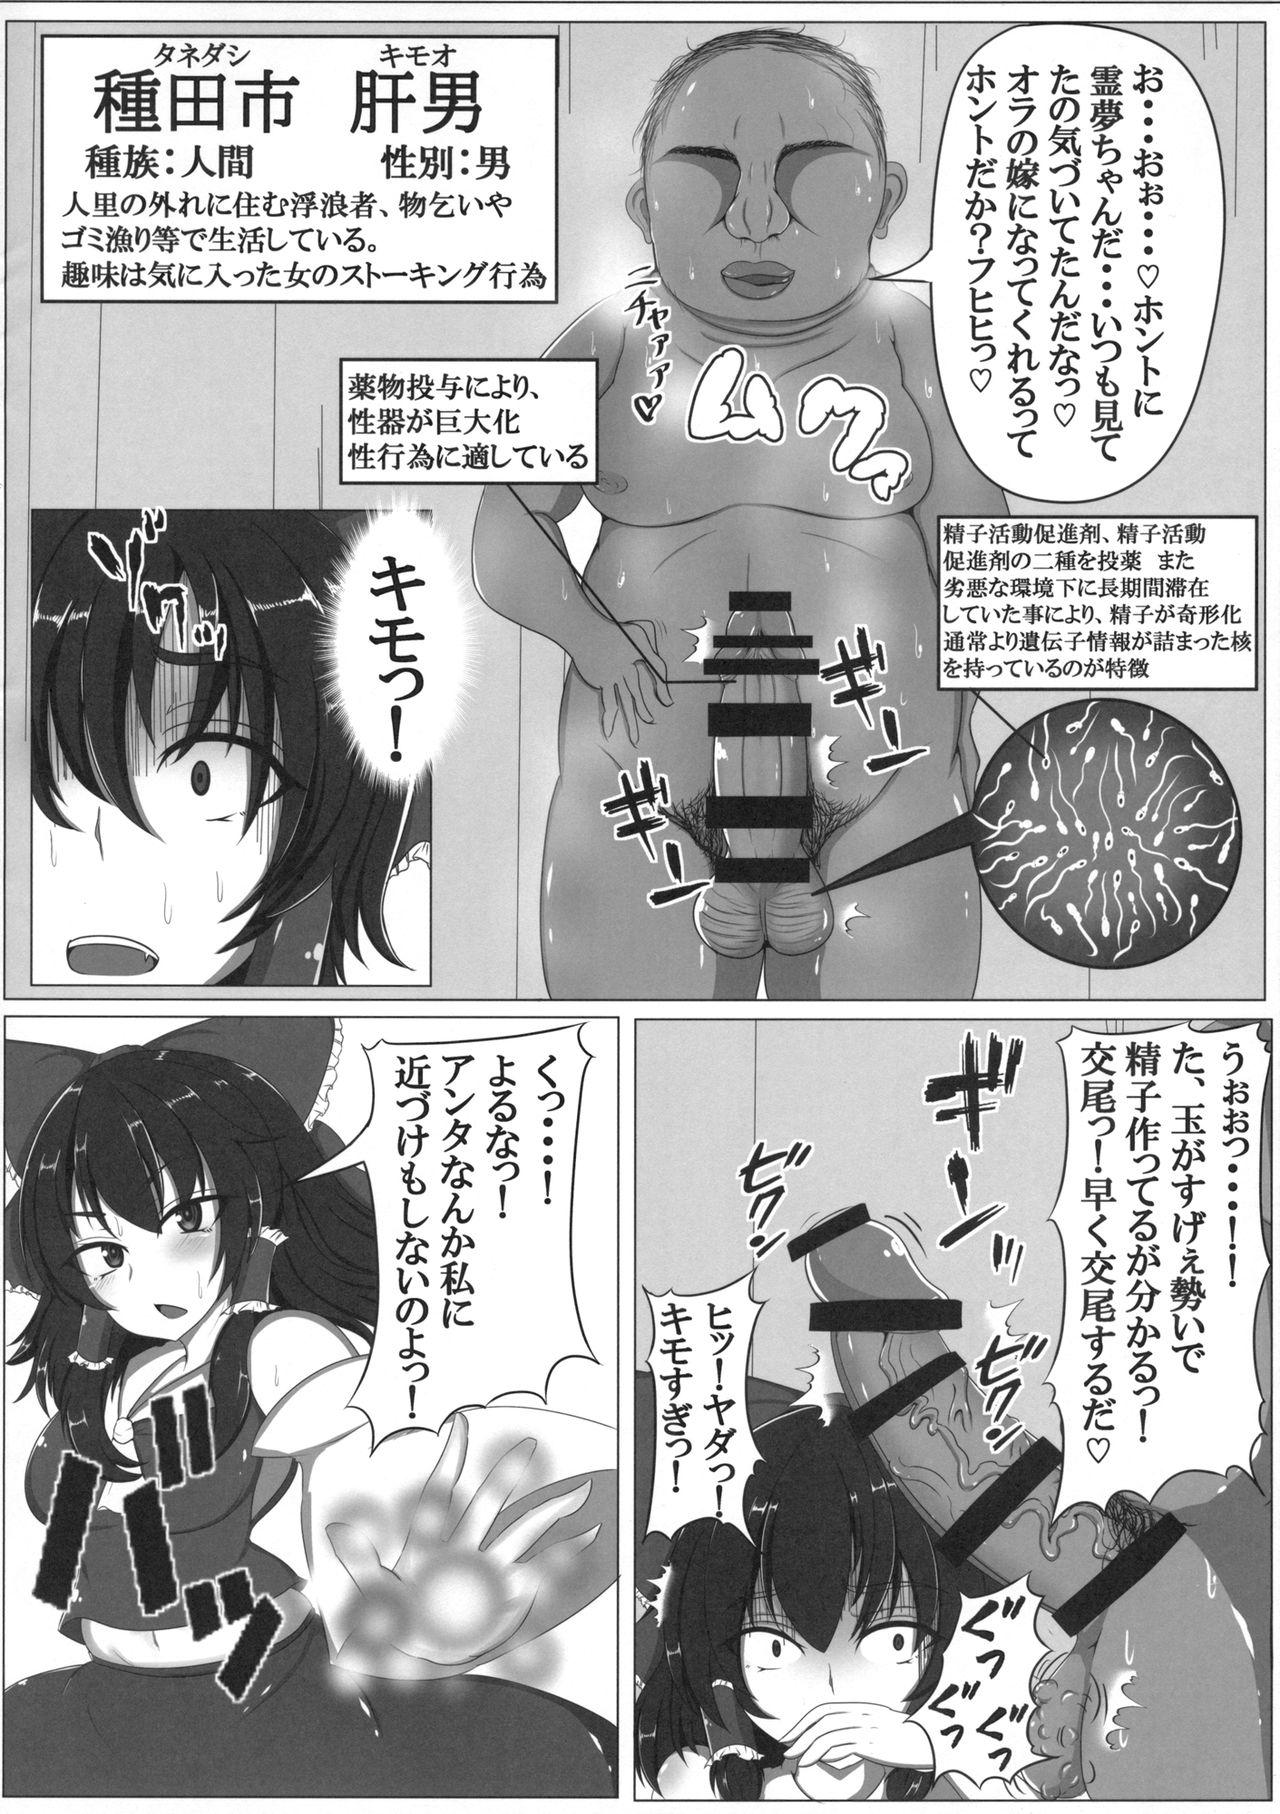 Blowjob Porn 東方婚姻録～博麗霊夢編～ - Touhou project Pounded - Page 5